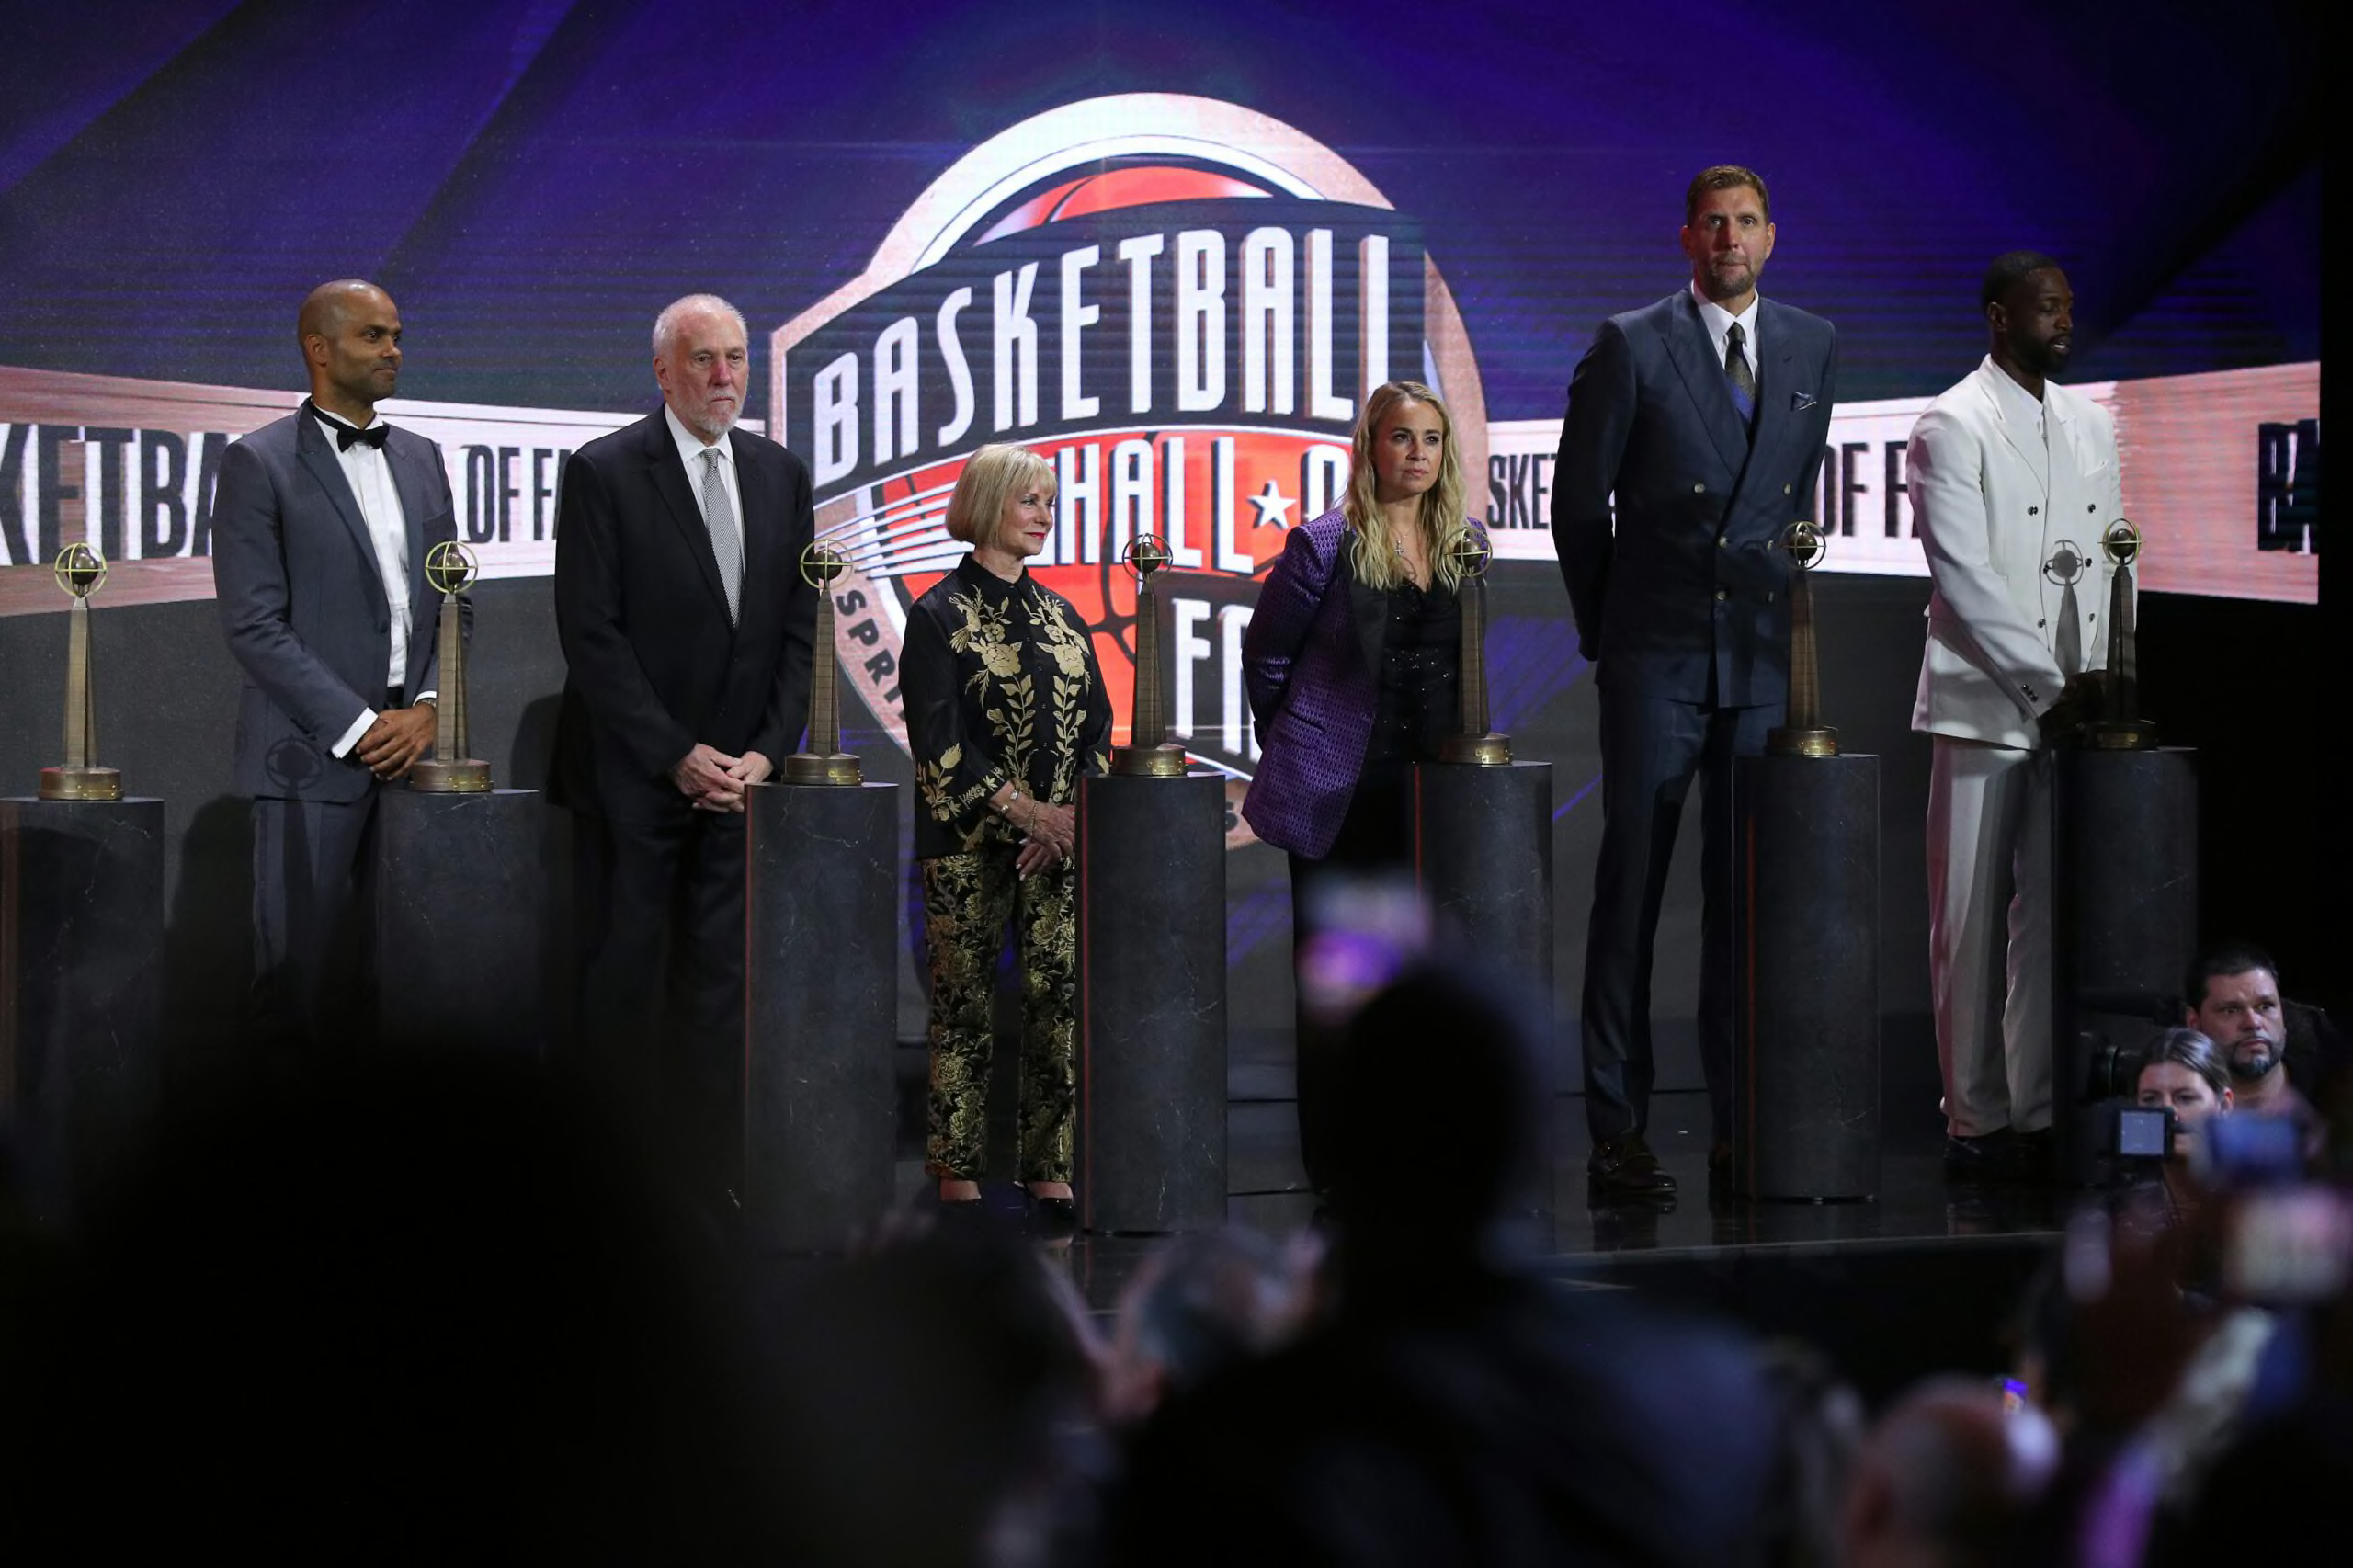 Basketball Hall of Fame enshrines new Class of 2022